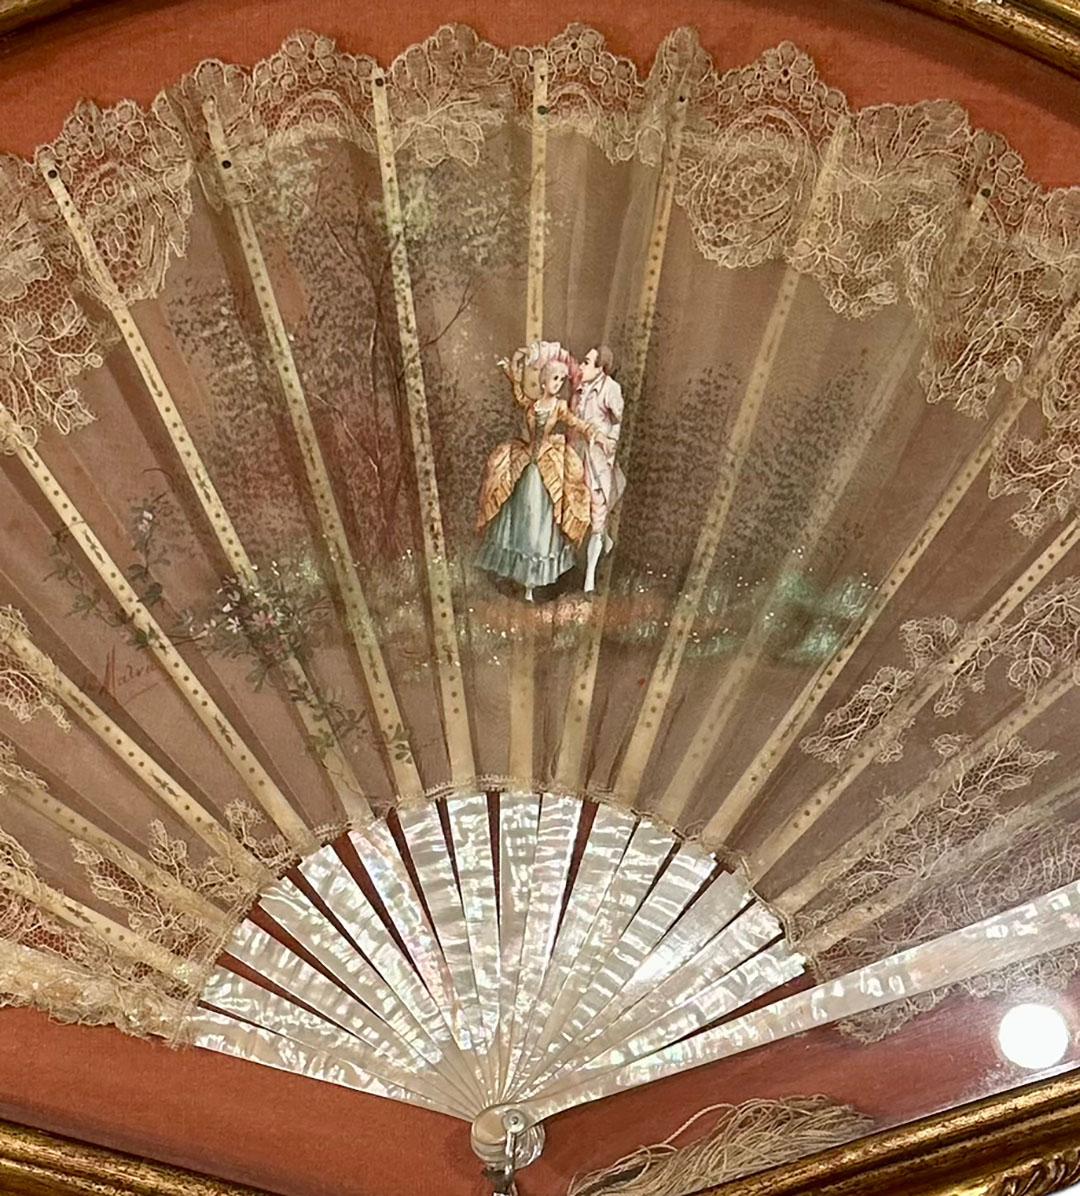 19th century French fan in an Italian Florentine fan case and the back is lined in velvet. The fan is hand painted, lace and mother of pearl. The case is turn of the century but fan is much older.